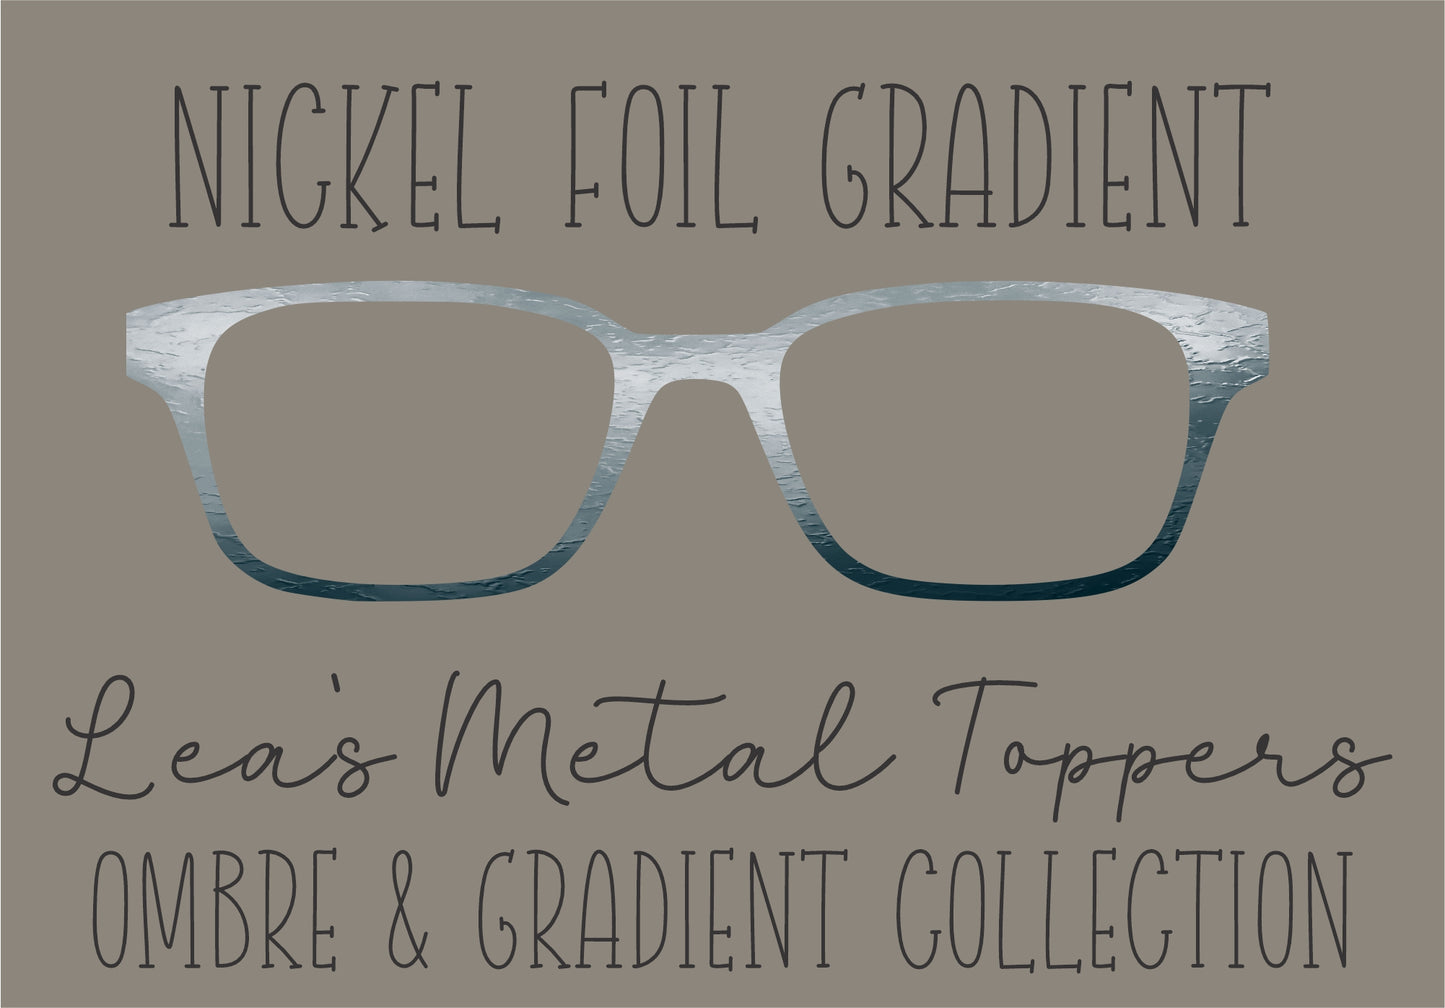 NICKEL FOIL GRADIENT Eyewear Frame Toppers COMES WITH MAGNETS